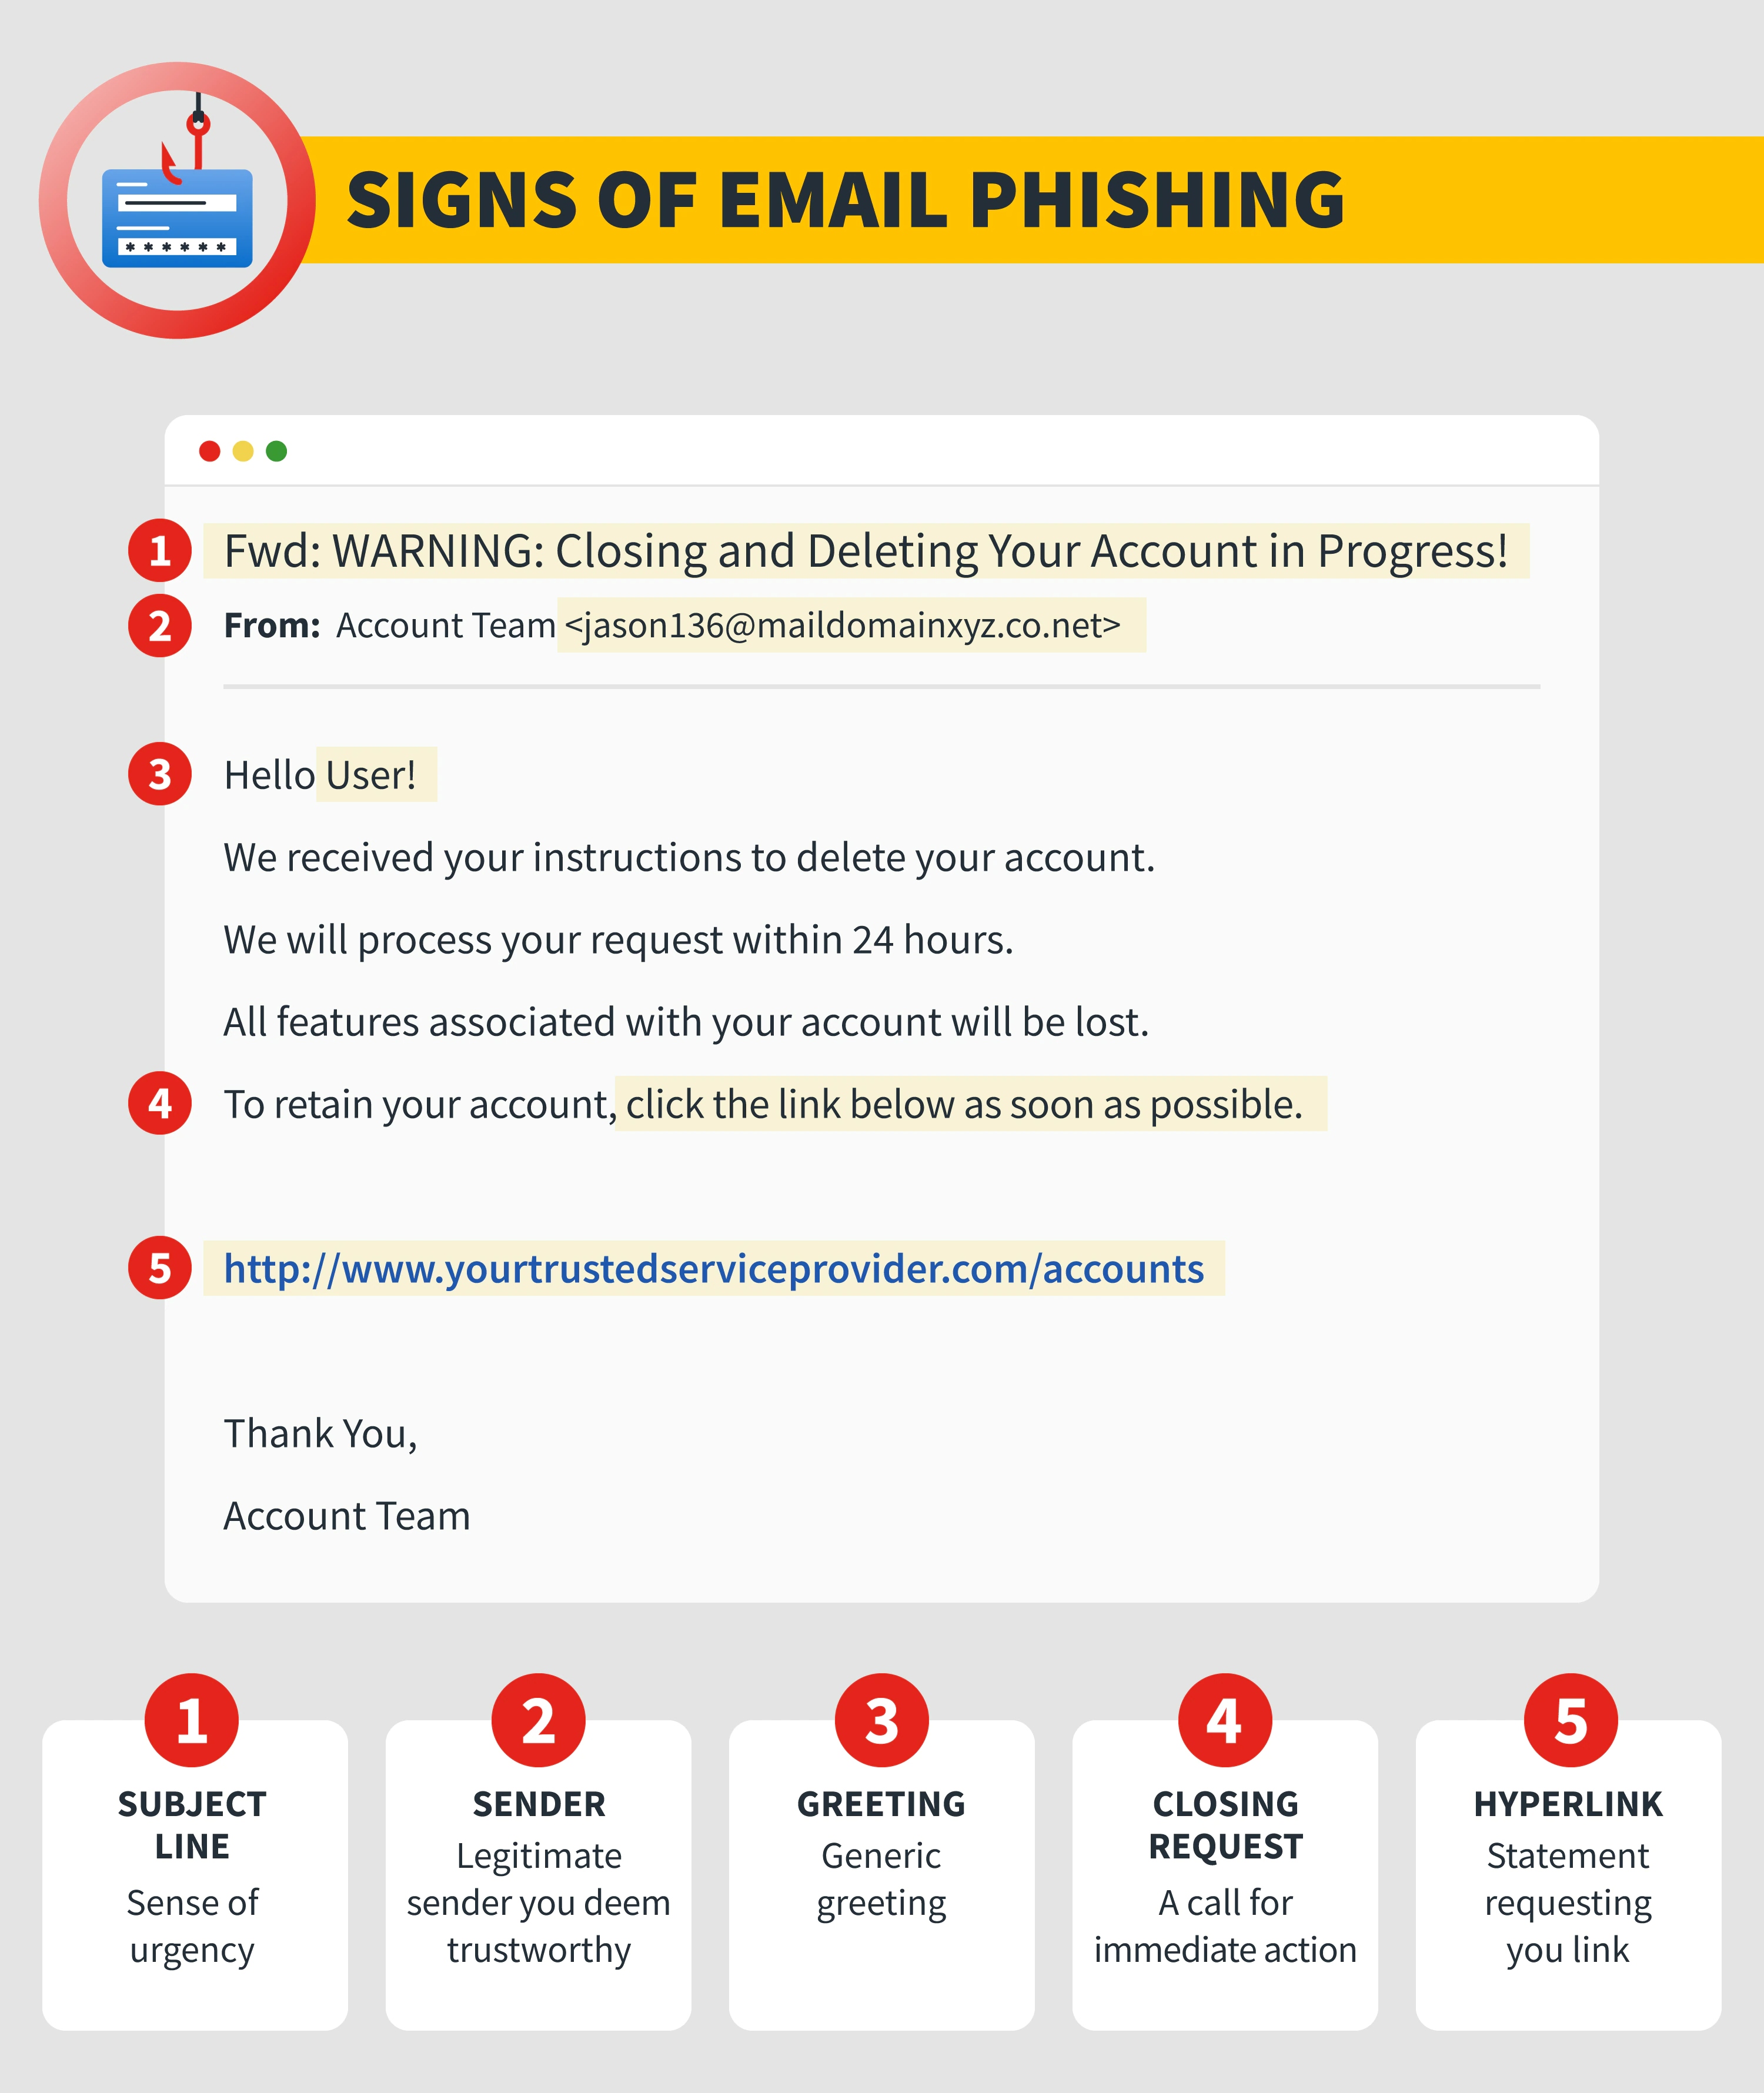 Norton Security recommends 5 signs to detect email phishing